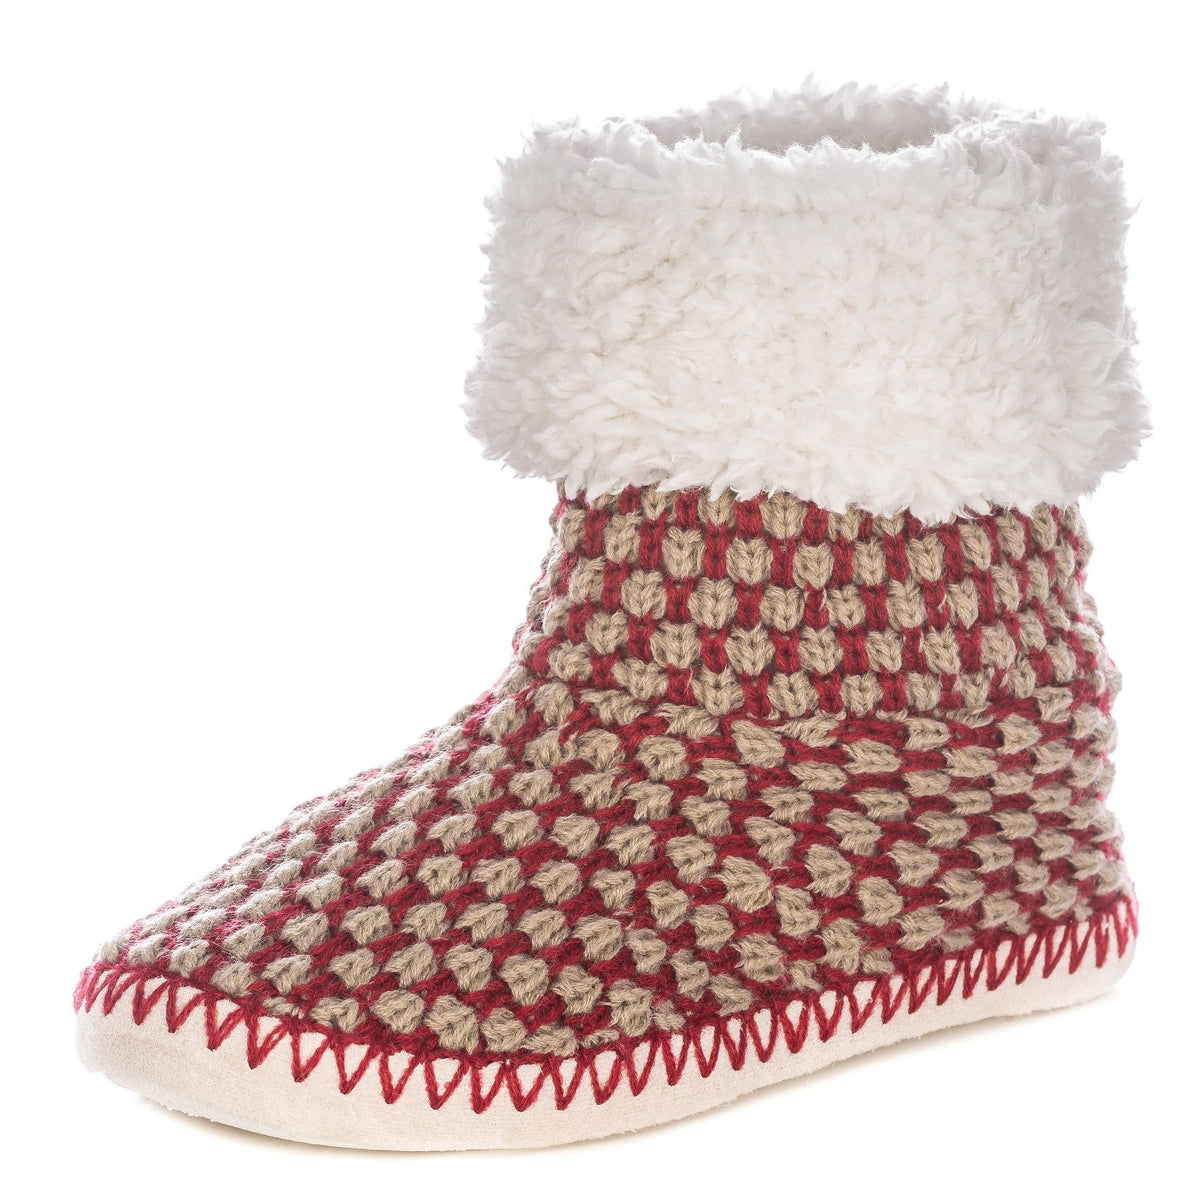 Women's Oxford Indoor Boot Slippers - Burgundy/Taupe